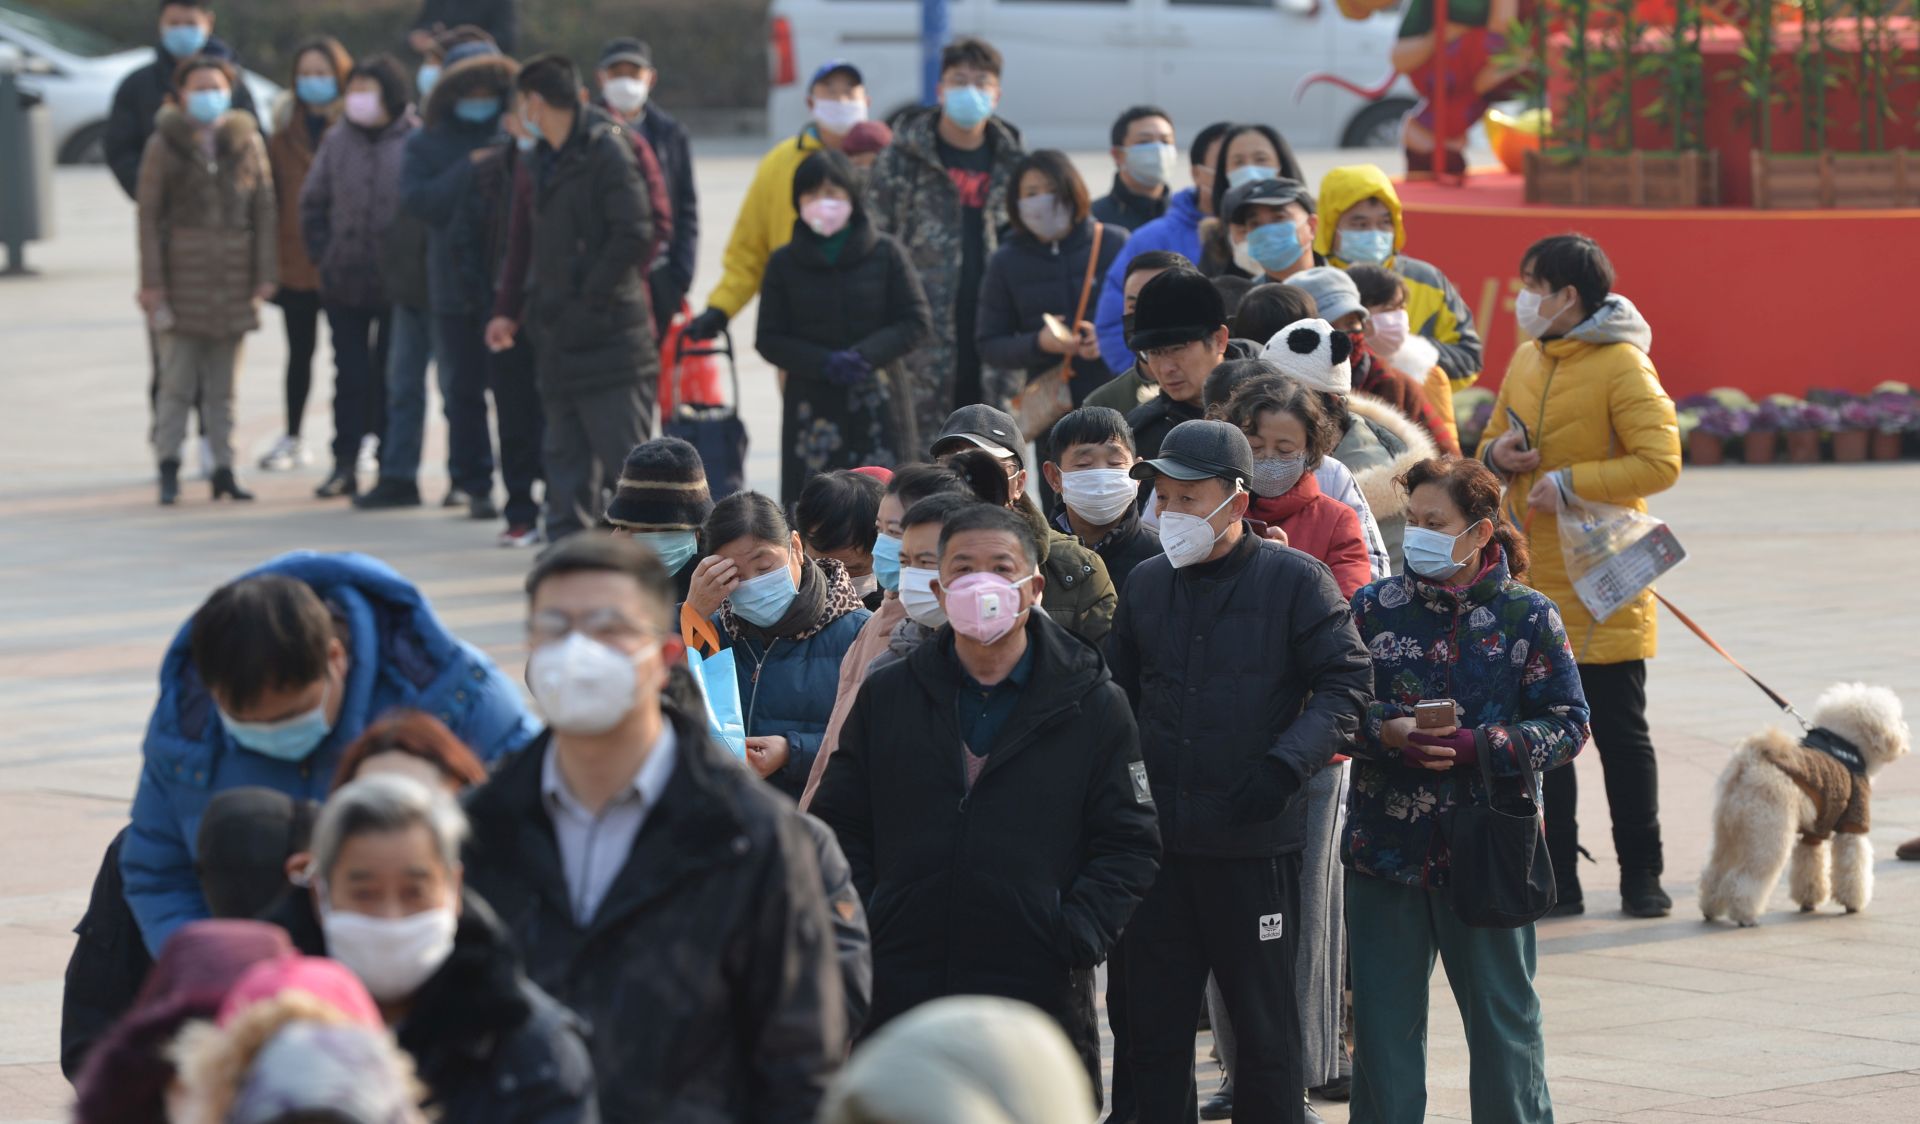 epa08174654 People line up outside a drugstore to buy medical masks in Nanjing, Jiangsu province, China, 29 January 2020. According to media reports, coronavirus, which in severe cases causes pneumonia, killed 132 people and infected nearly 6,000, mainly in China. Governments around the world are taking preventative measures to health the spread of the virus.  EPA/FANG DONGXU CHINA OUT